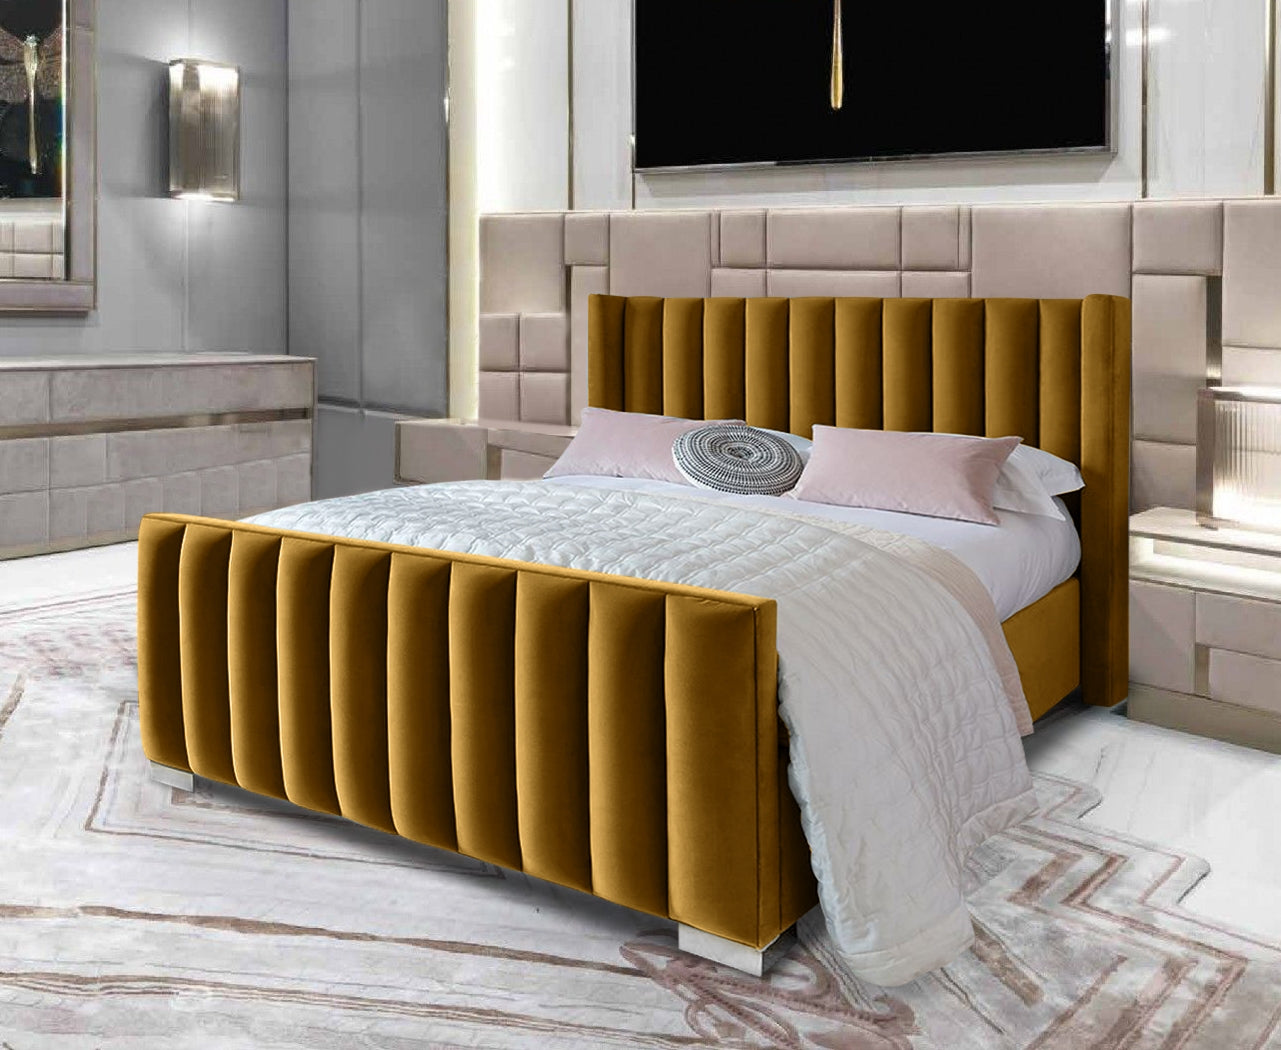 The Bespoke Pia Bed- Fully Customisable with Storage Options